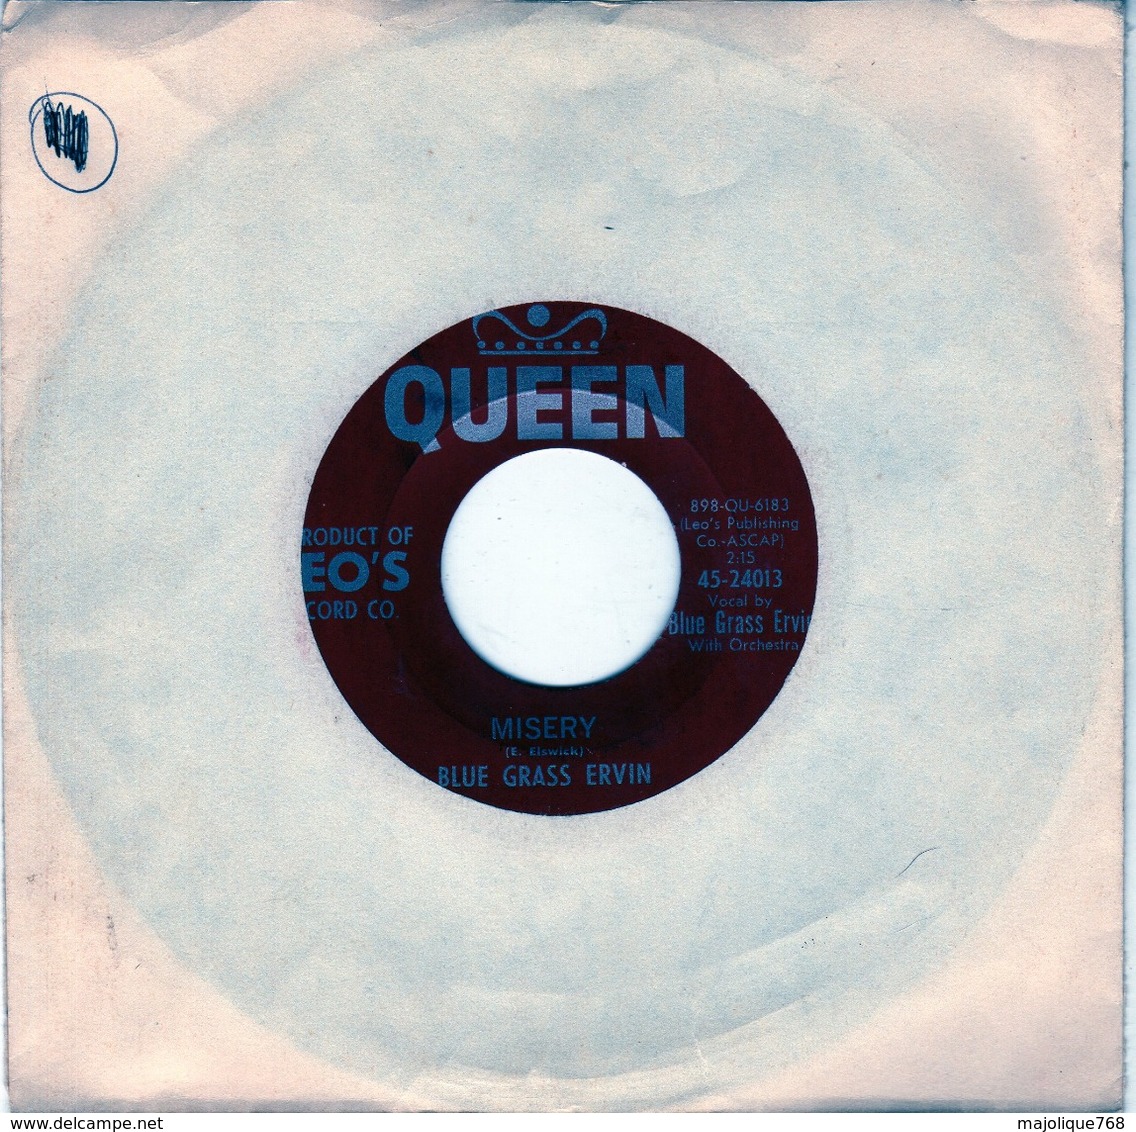 Blue Grass Ervin - Misery - I Won't Cry Alone - Queen 45-24013 - 1962 - - Country Et Folk